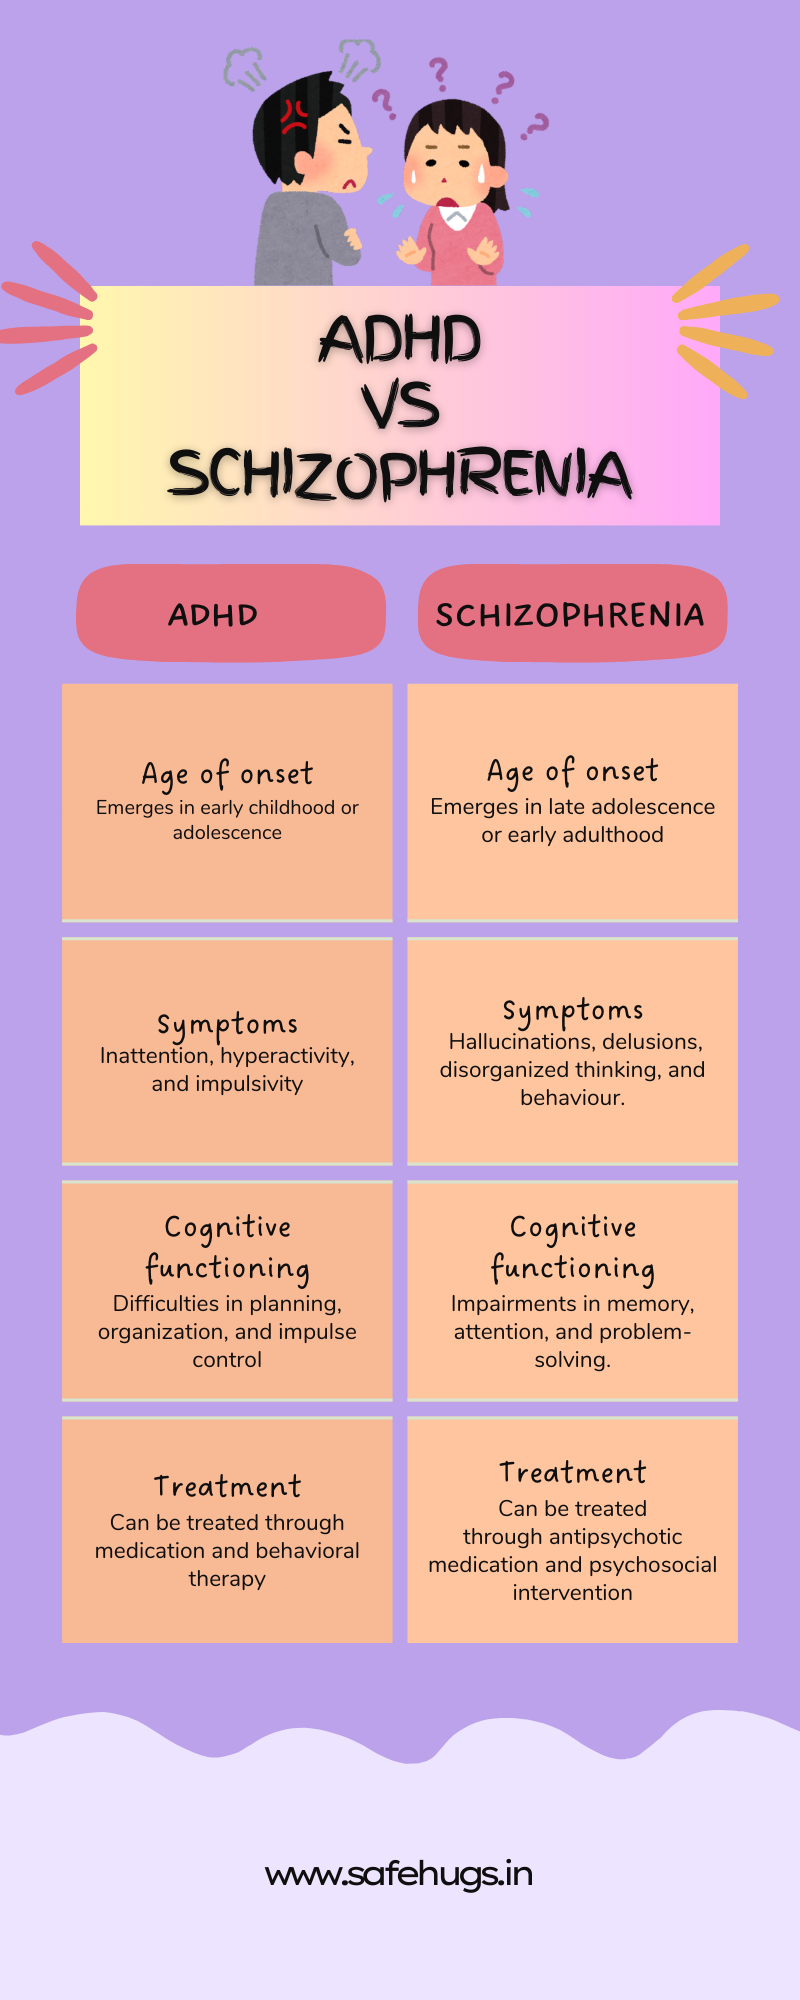 Explaining the difference between ADHD and Schizophrenia.